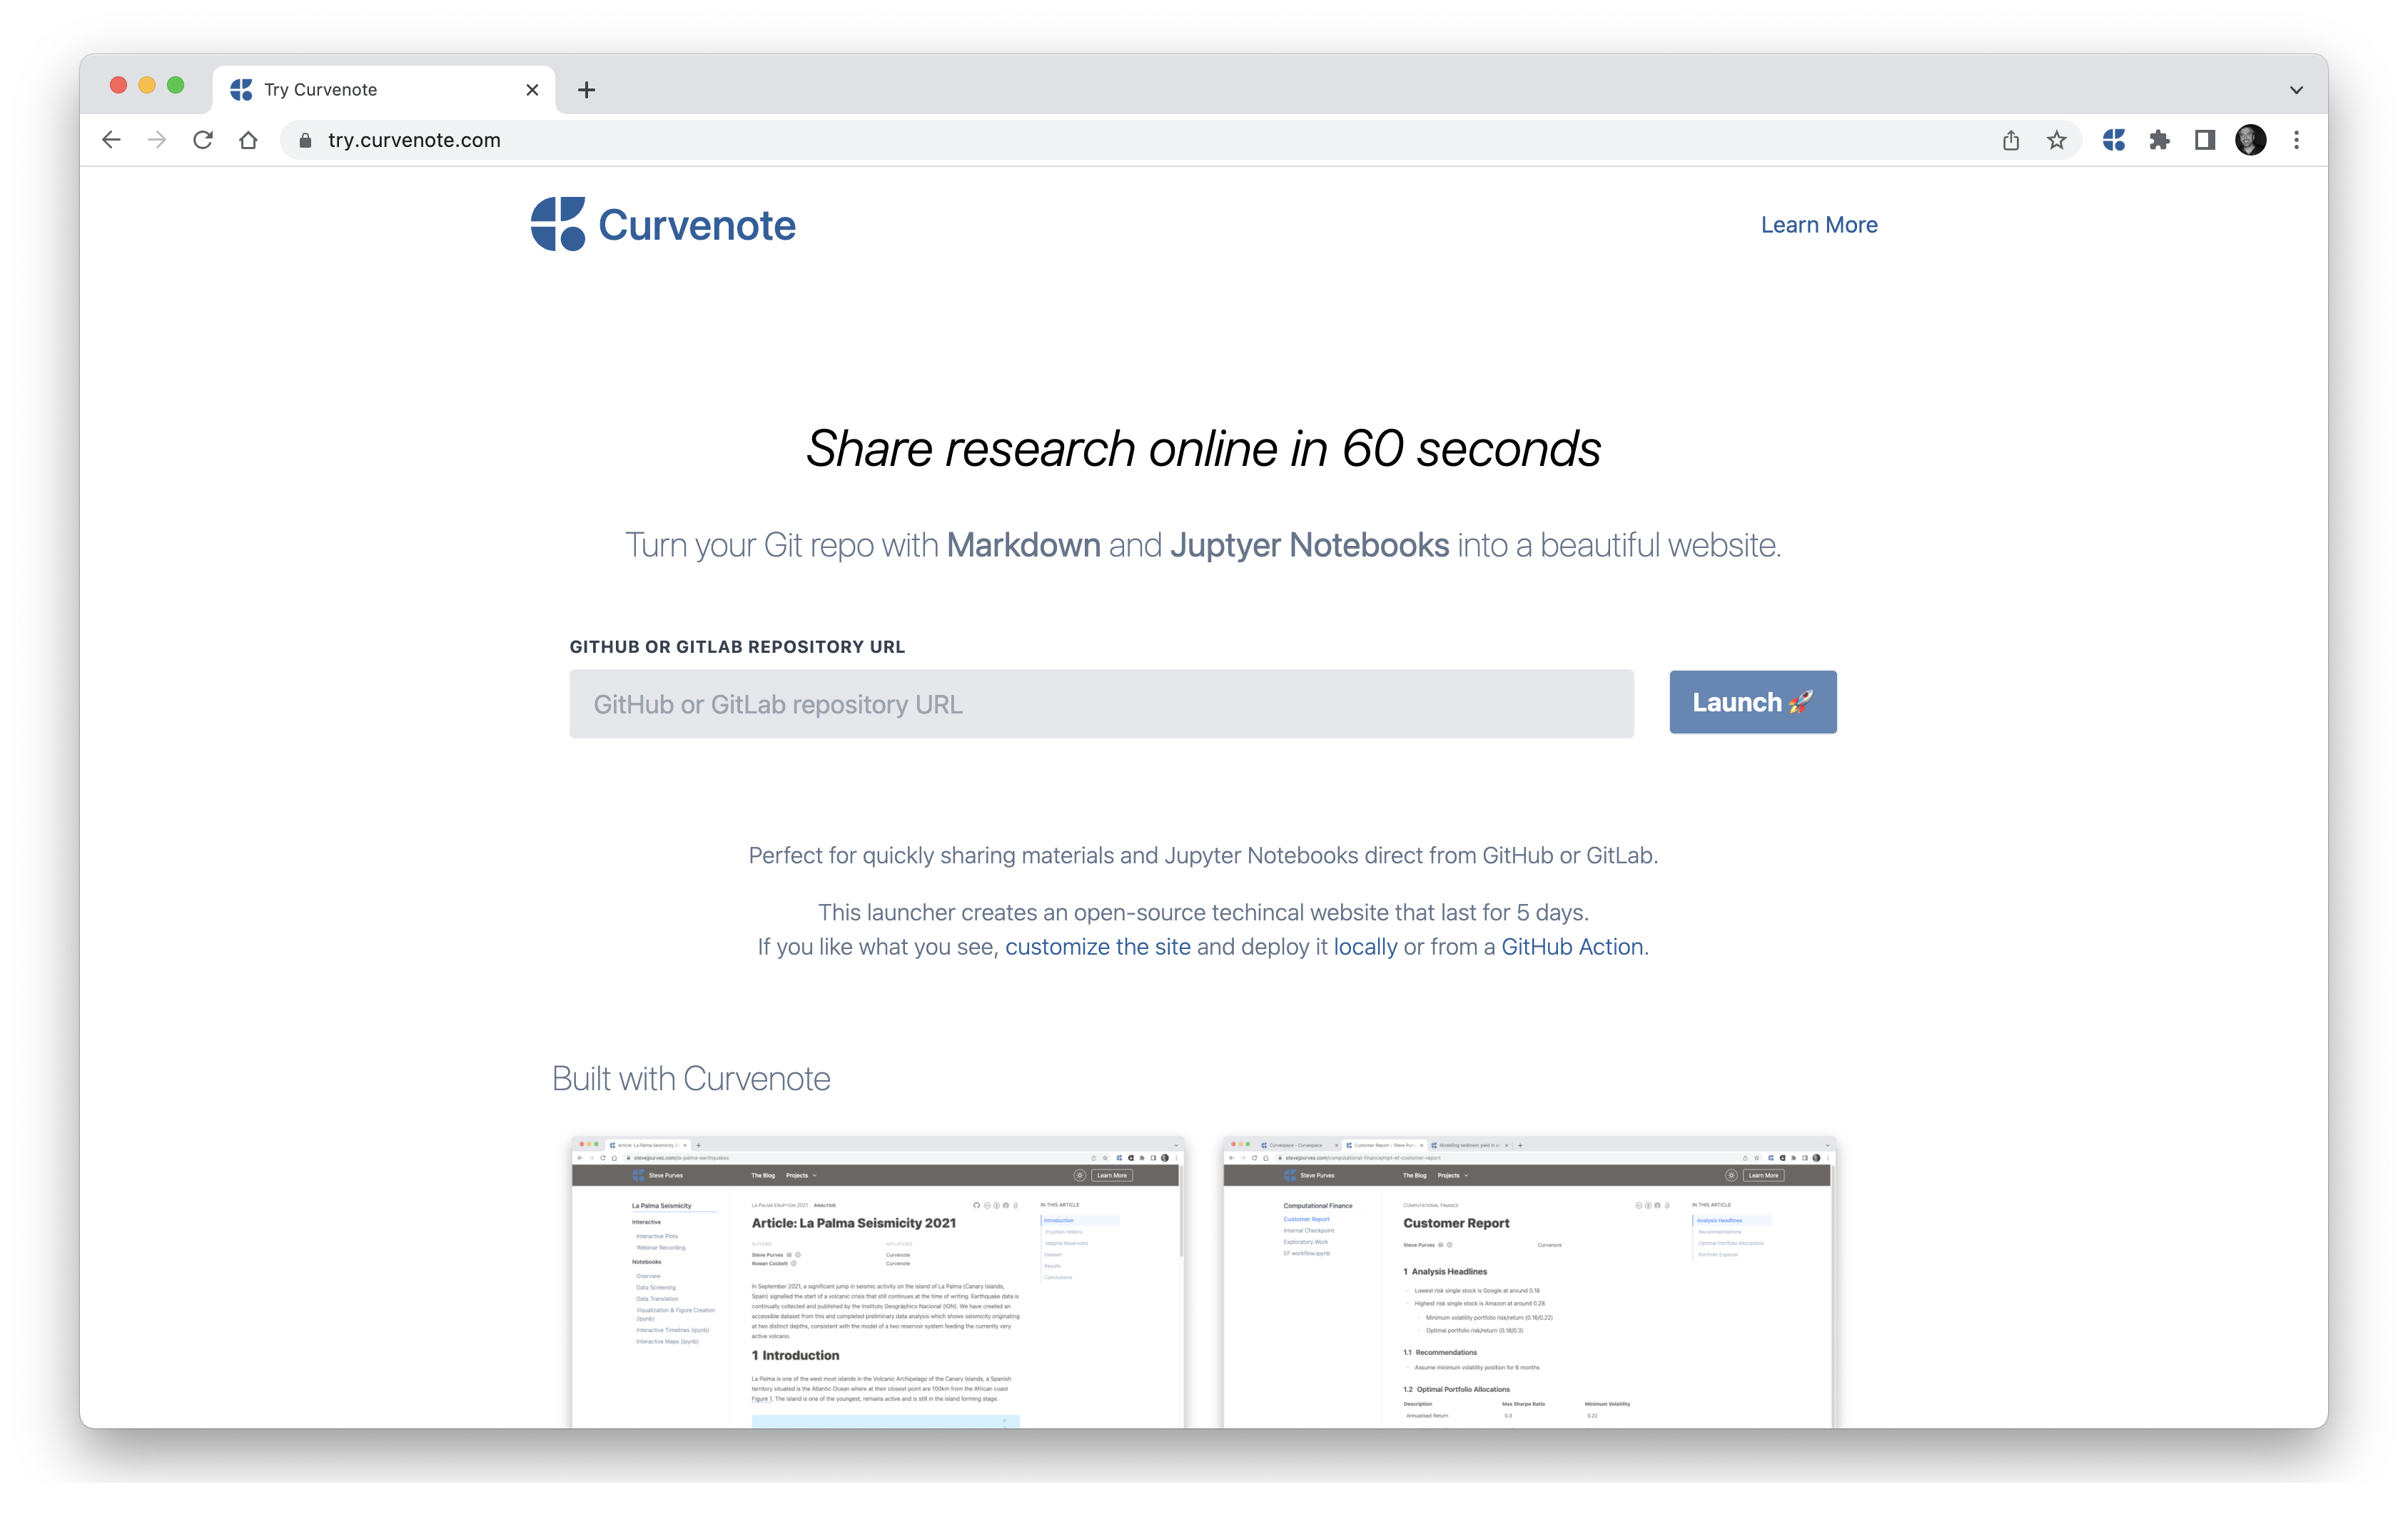 Share research online in 60 seconds using Curvenote.